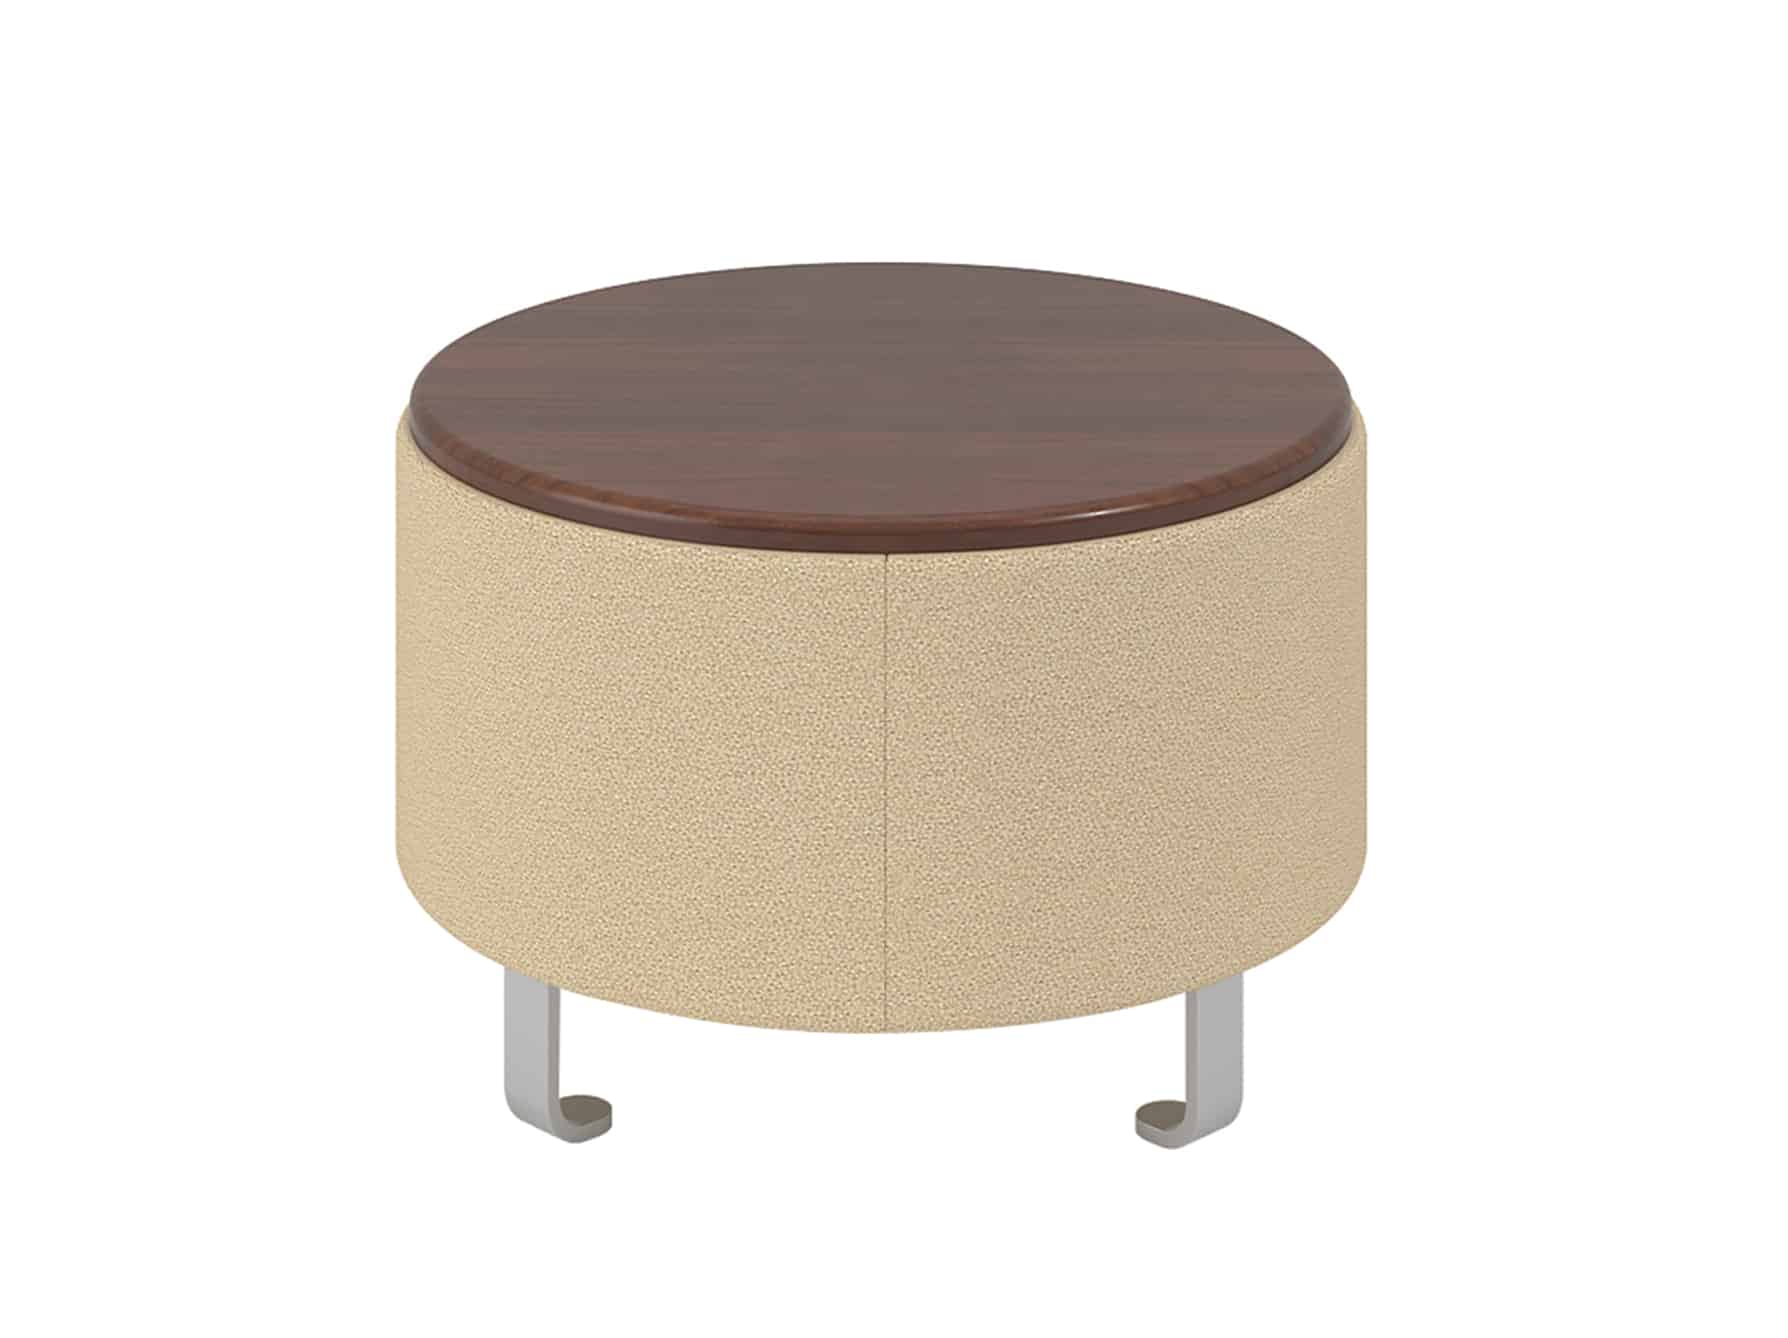 22" Round Ottomans with Low Table Top, Sled Feet